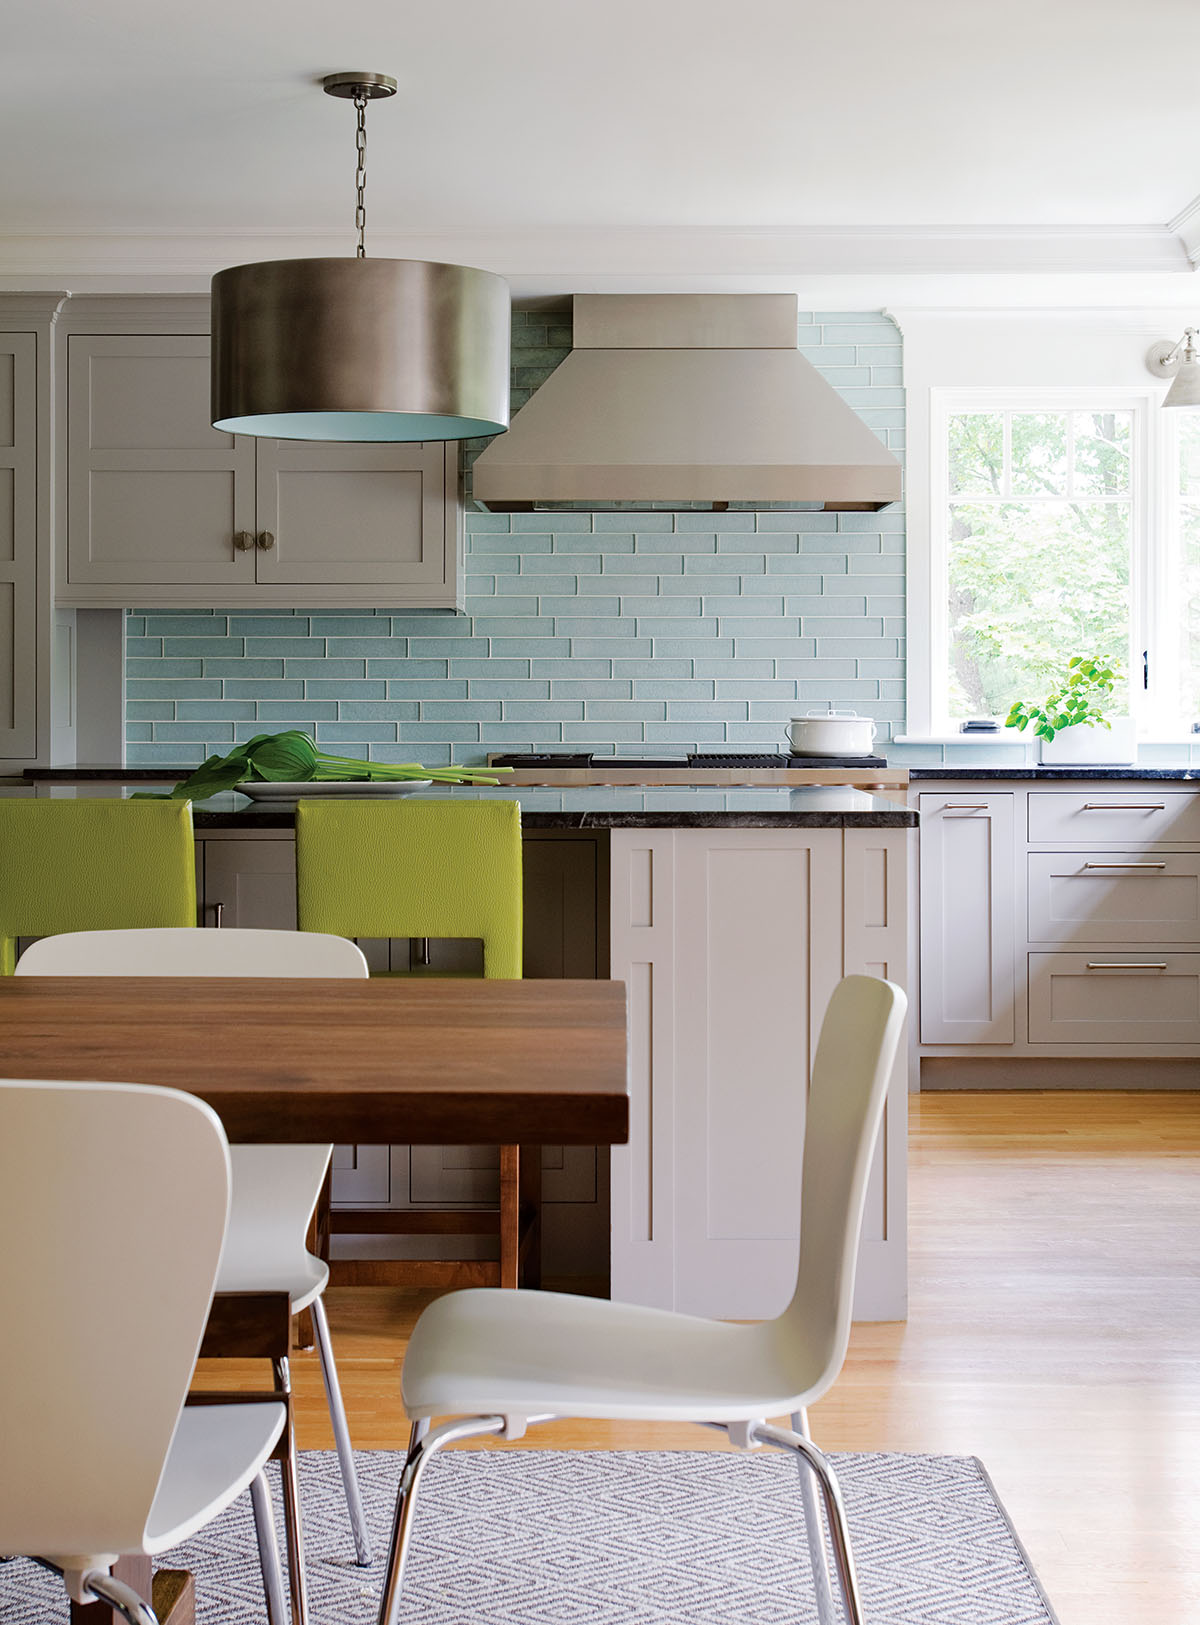 Kitchens Guide 2014